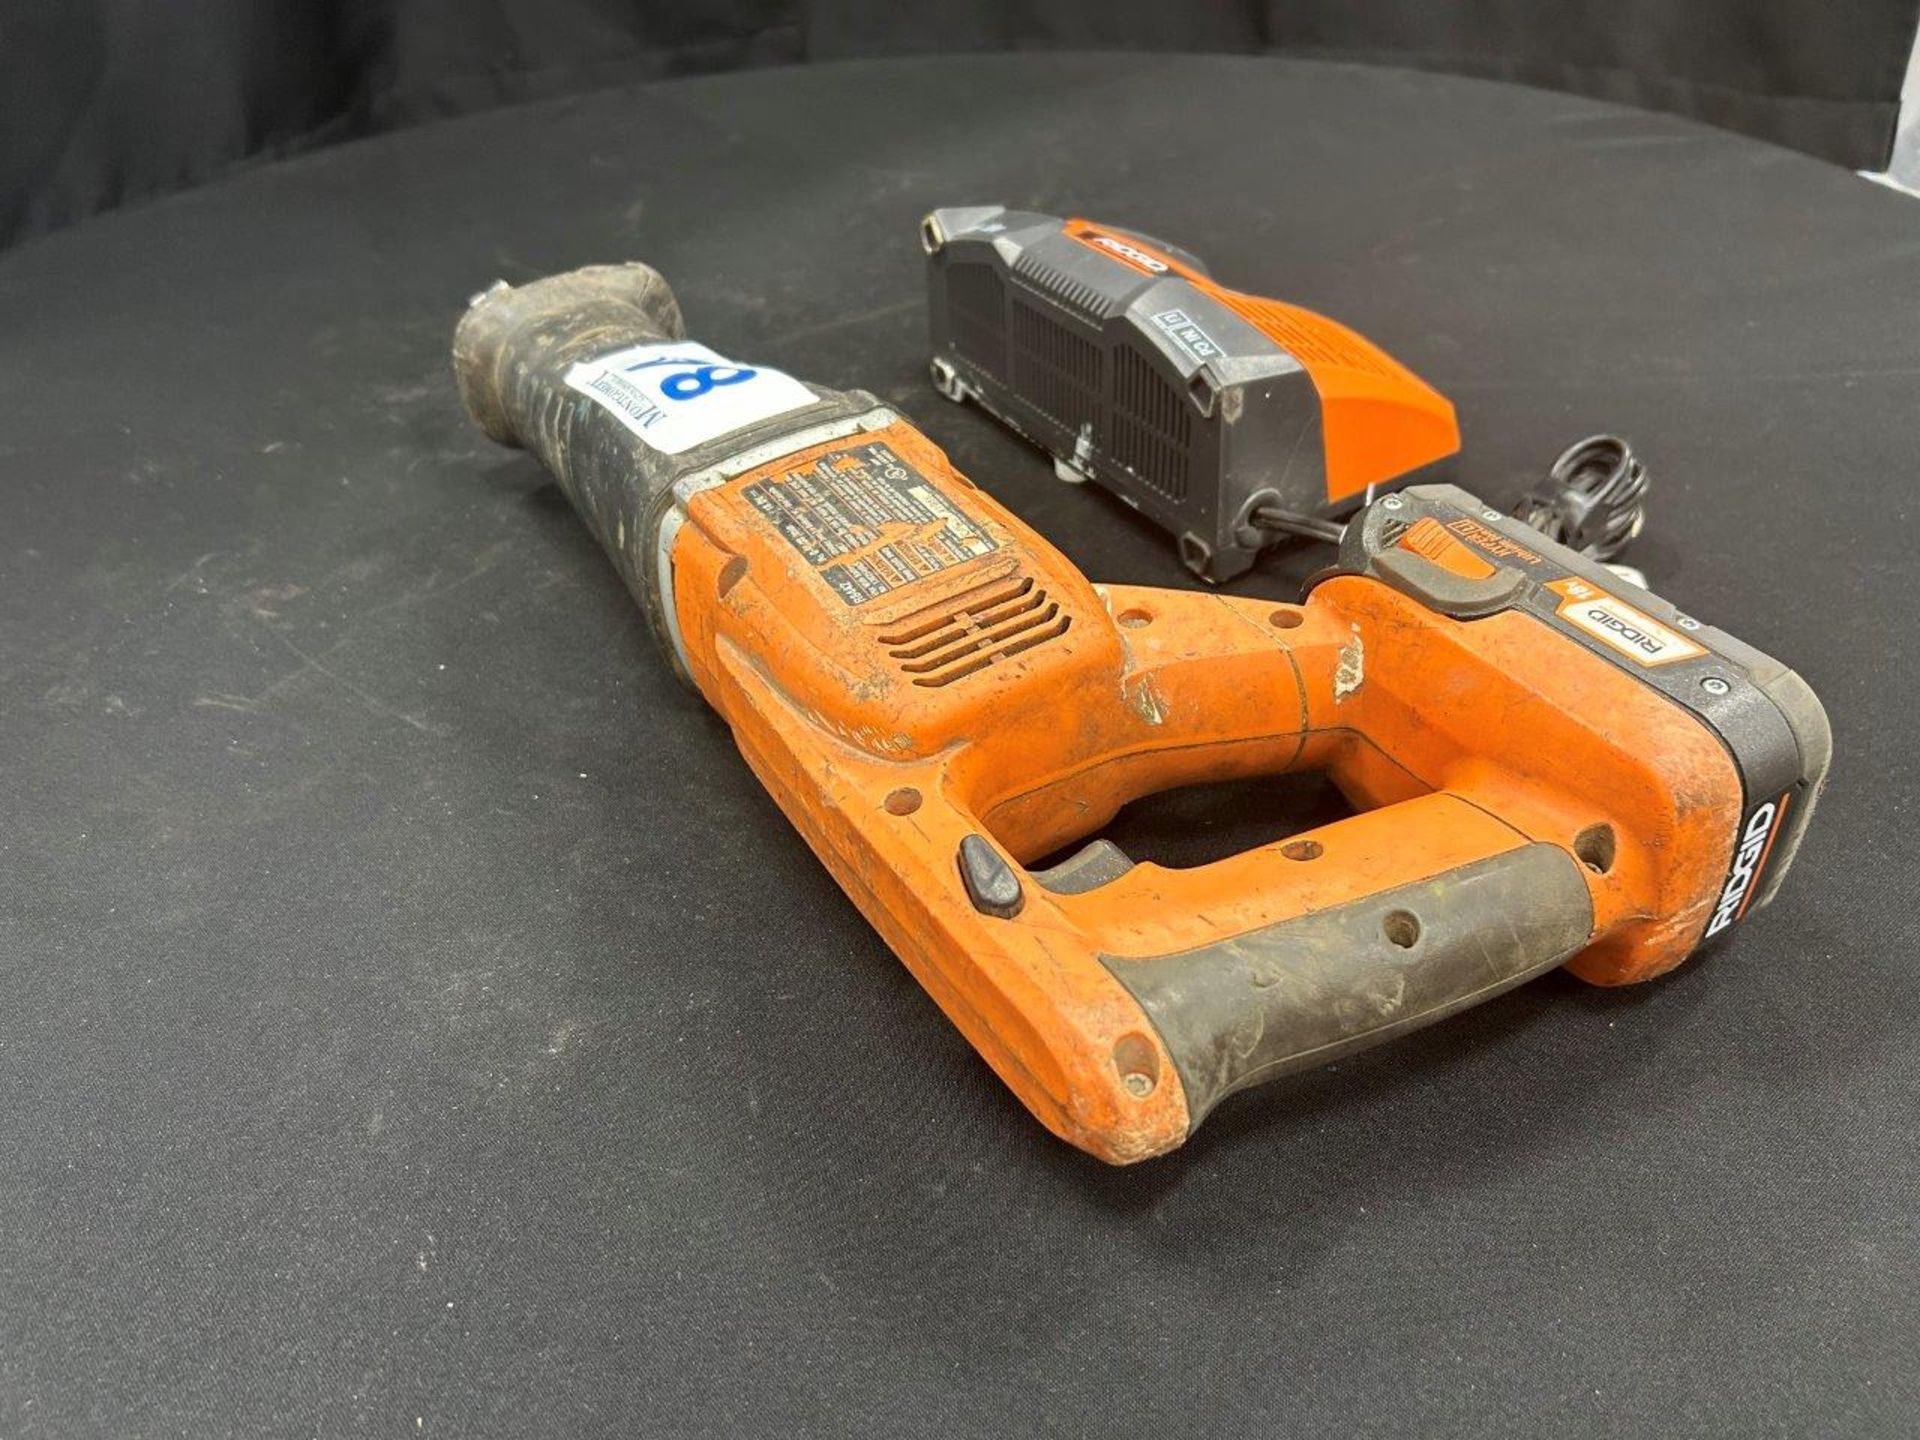 RIDGID 18V CORDLESS RECIPROCATING SAW W/ BATTERY AND CHARGER - B65 - Image 3 of 3